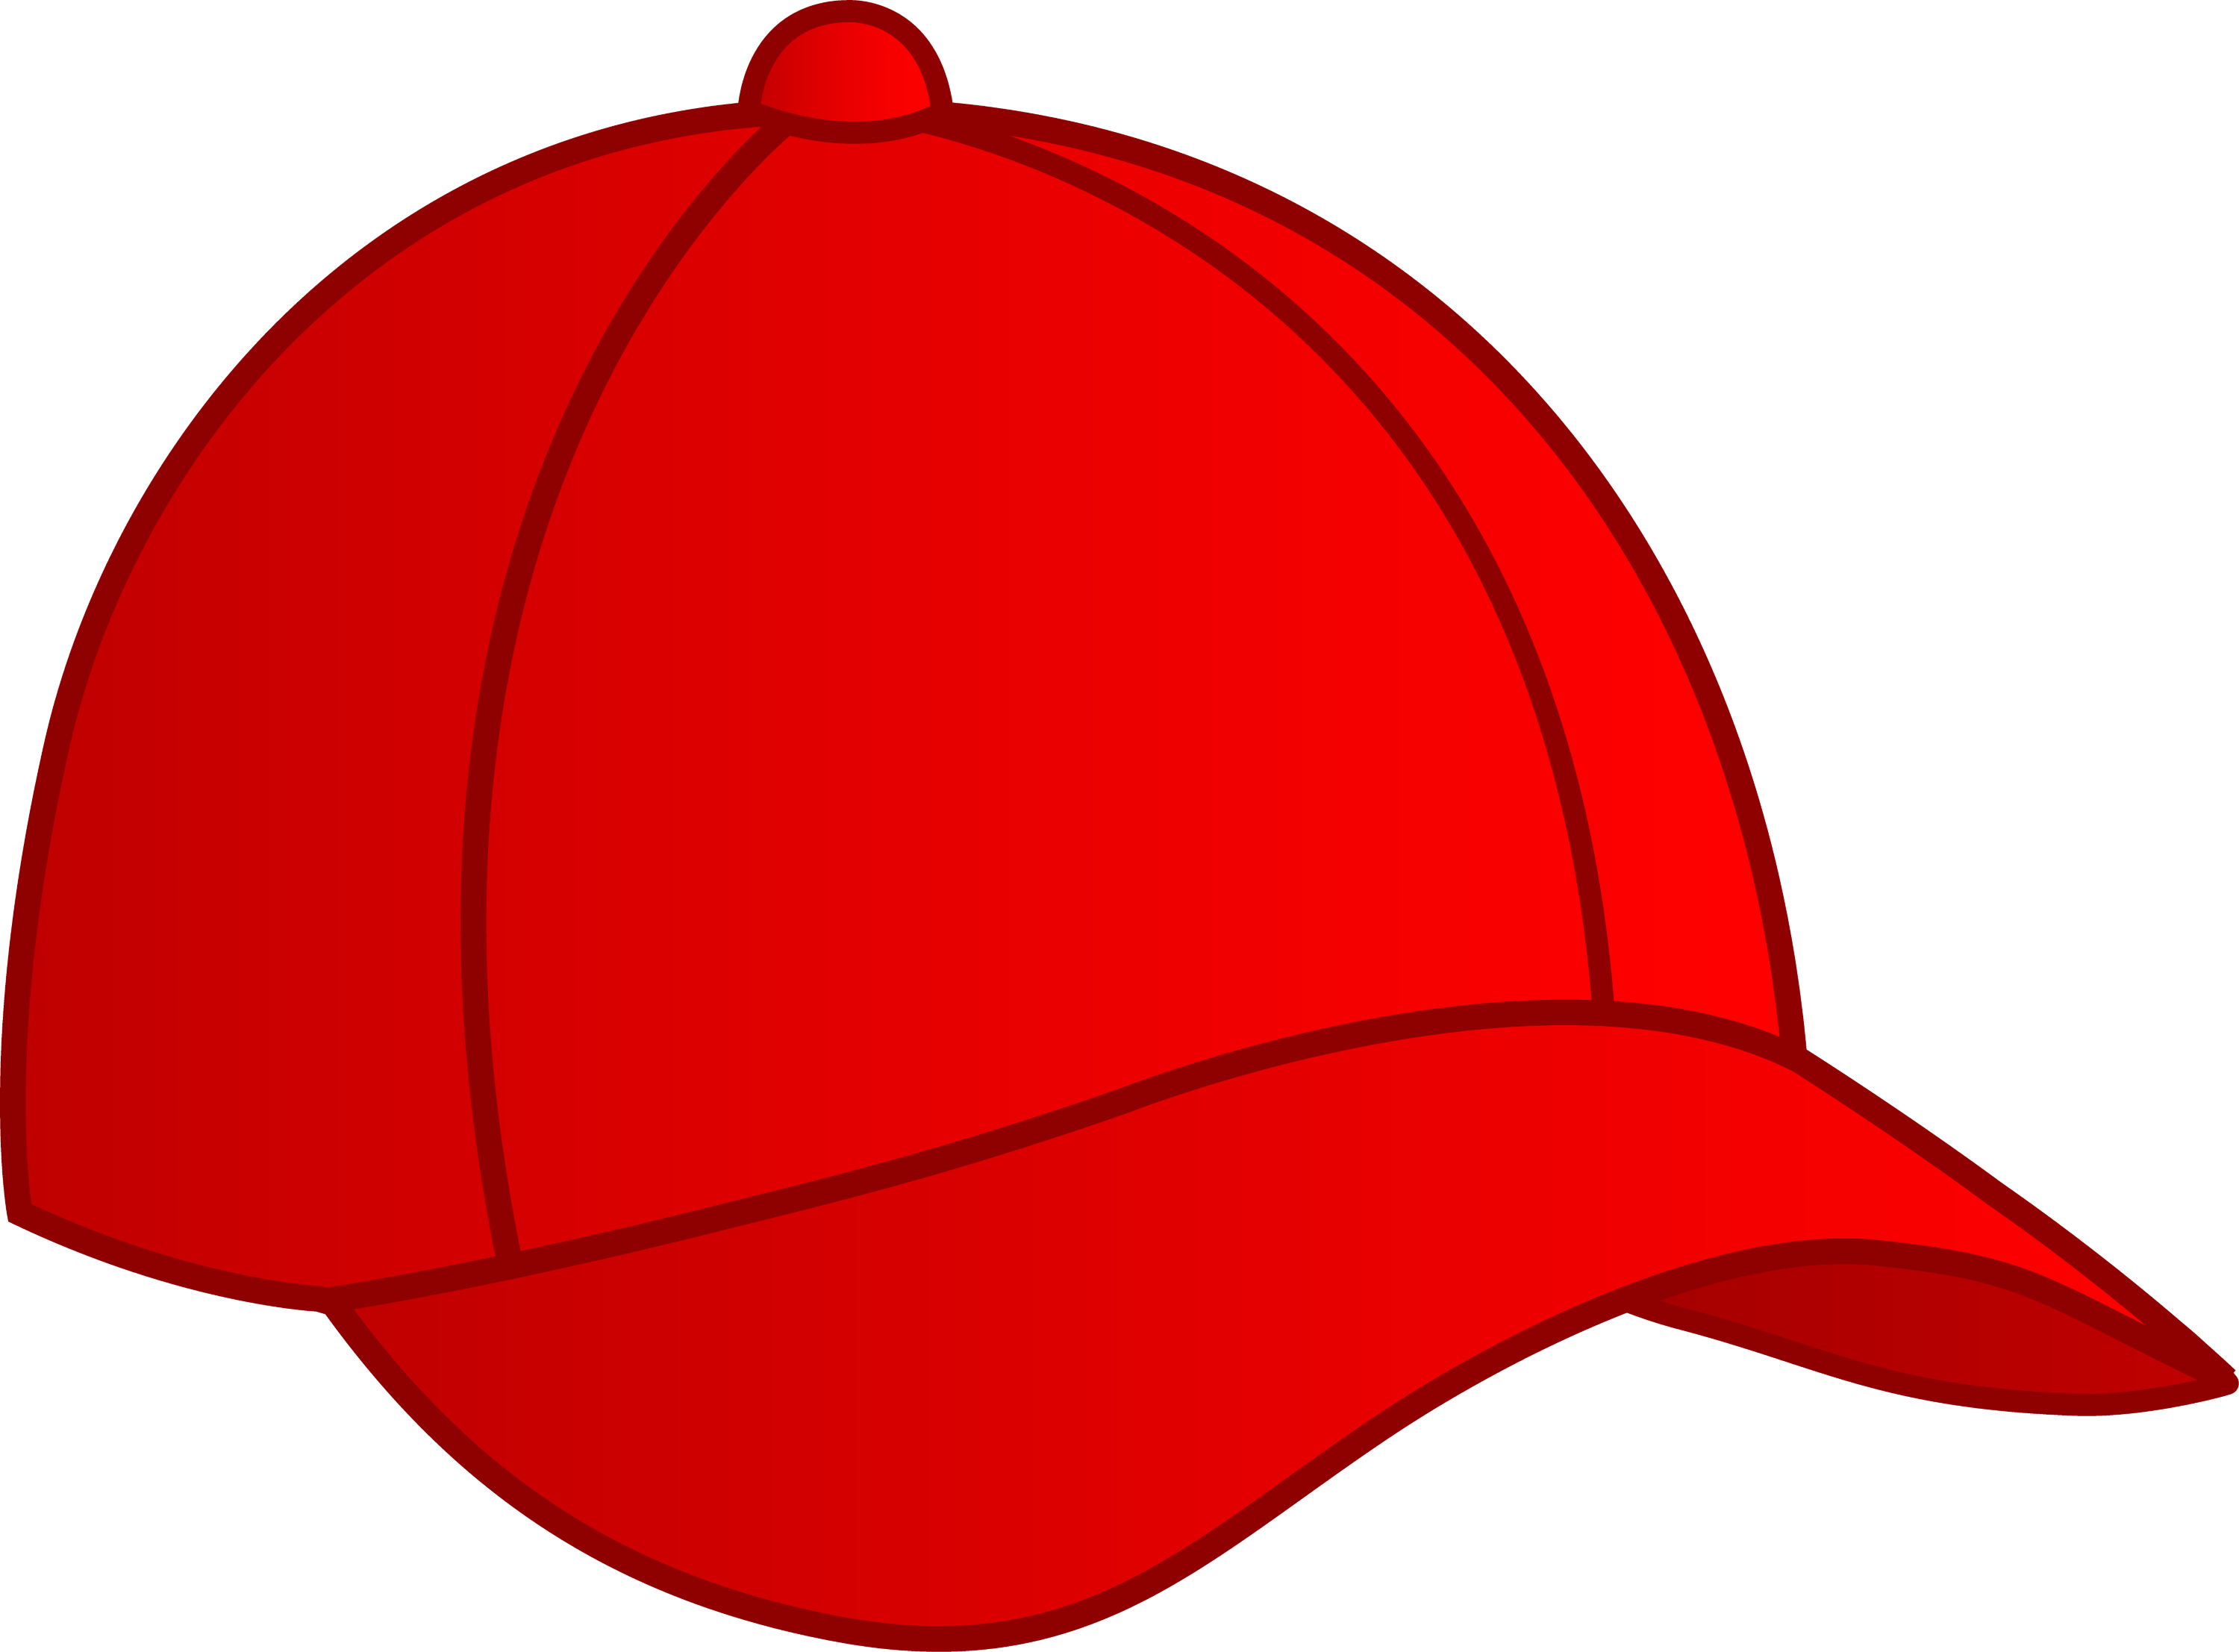 clip art red hat - photo #16